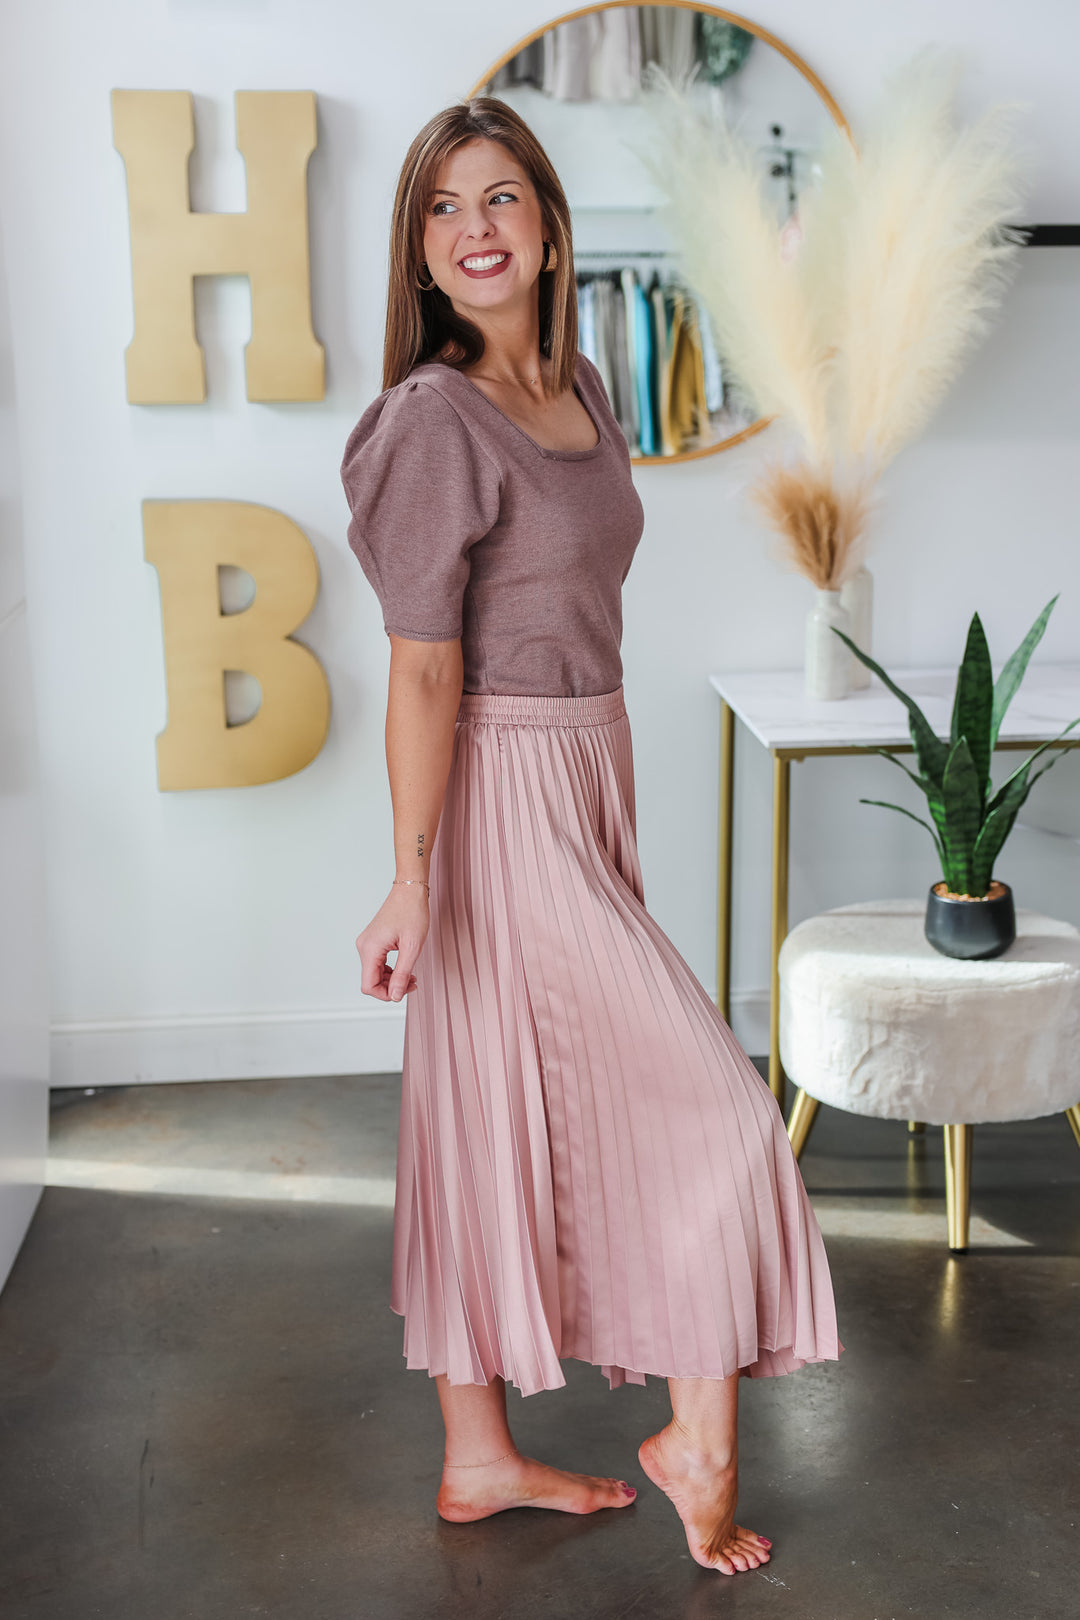 A brunette woman standing in a shop wearing a pink satin pleated midi skirt with elastic waist and taupe top.